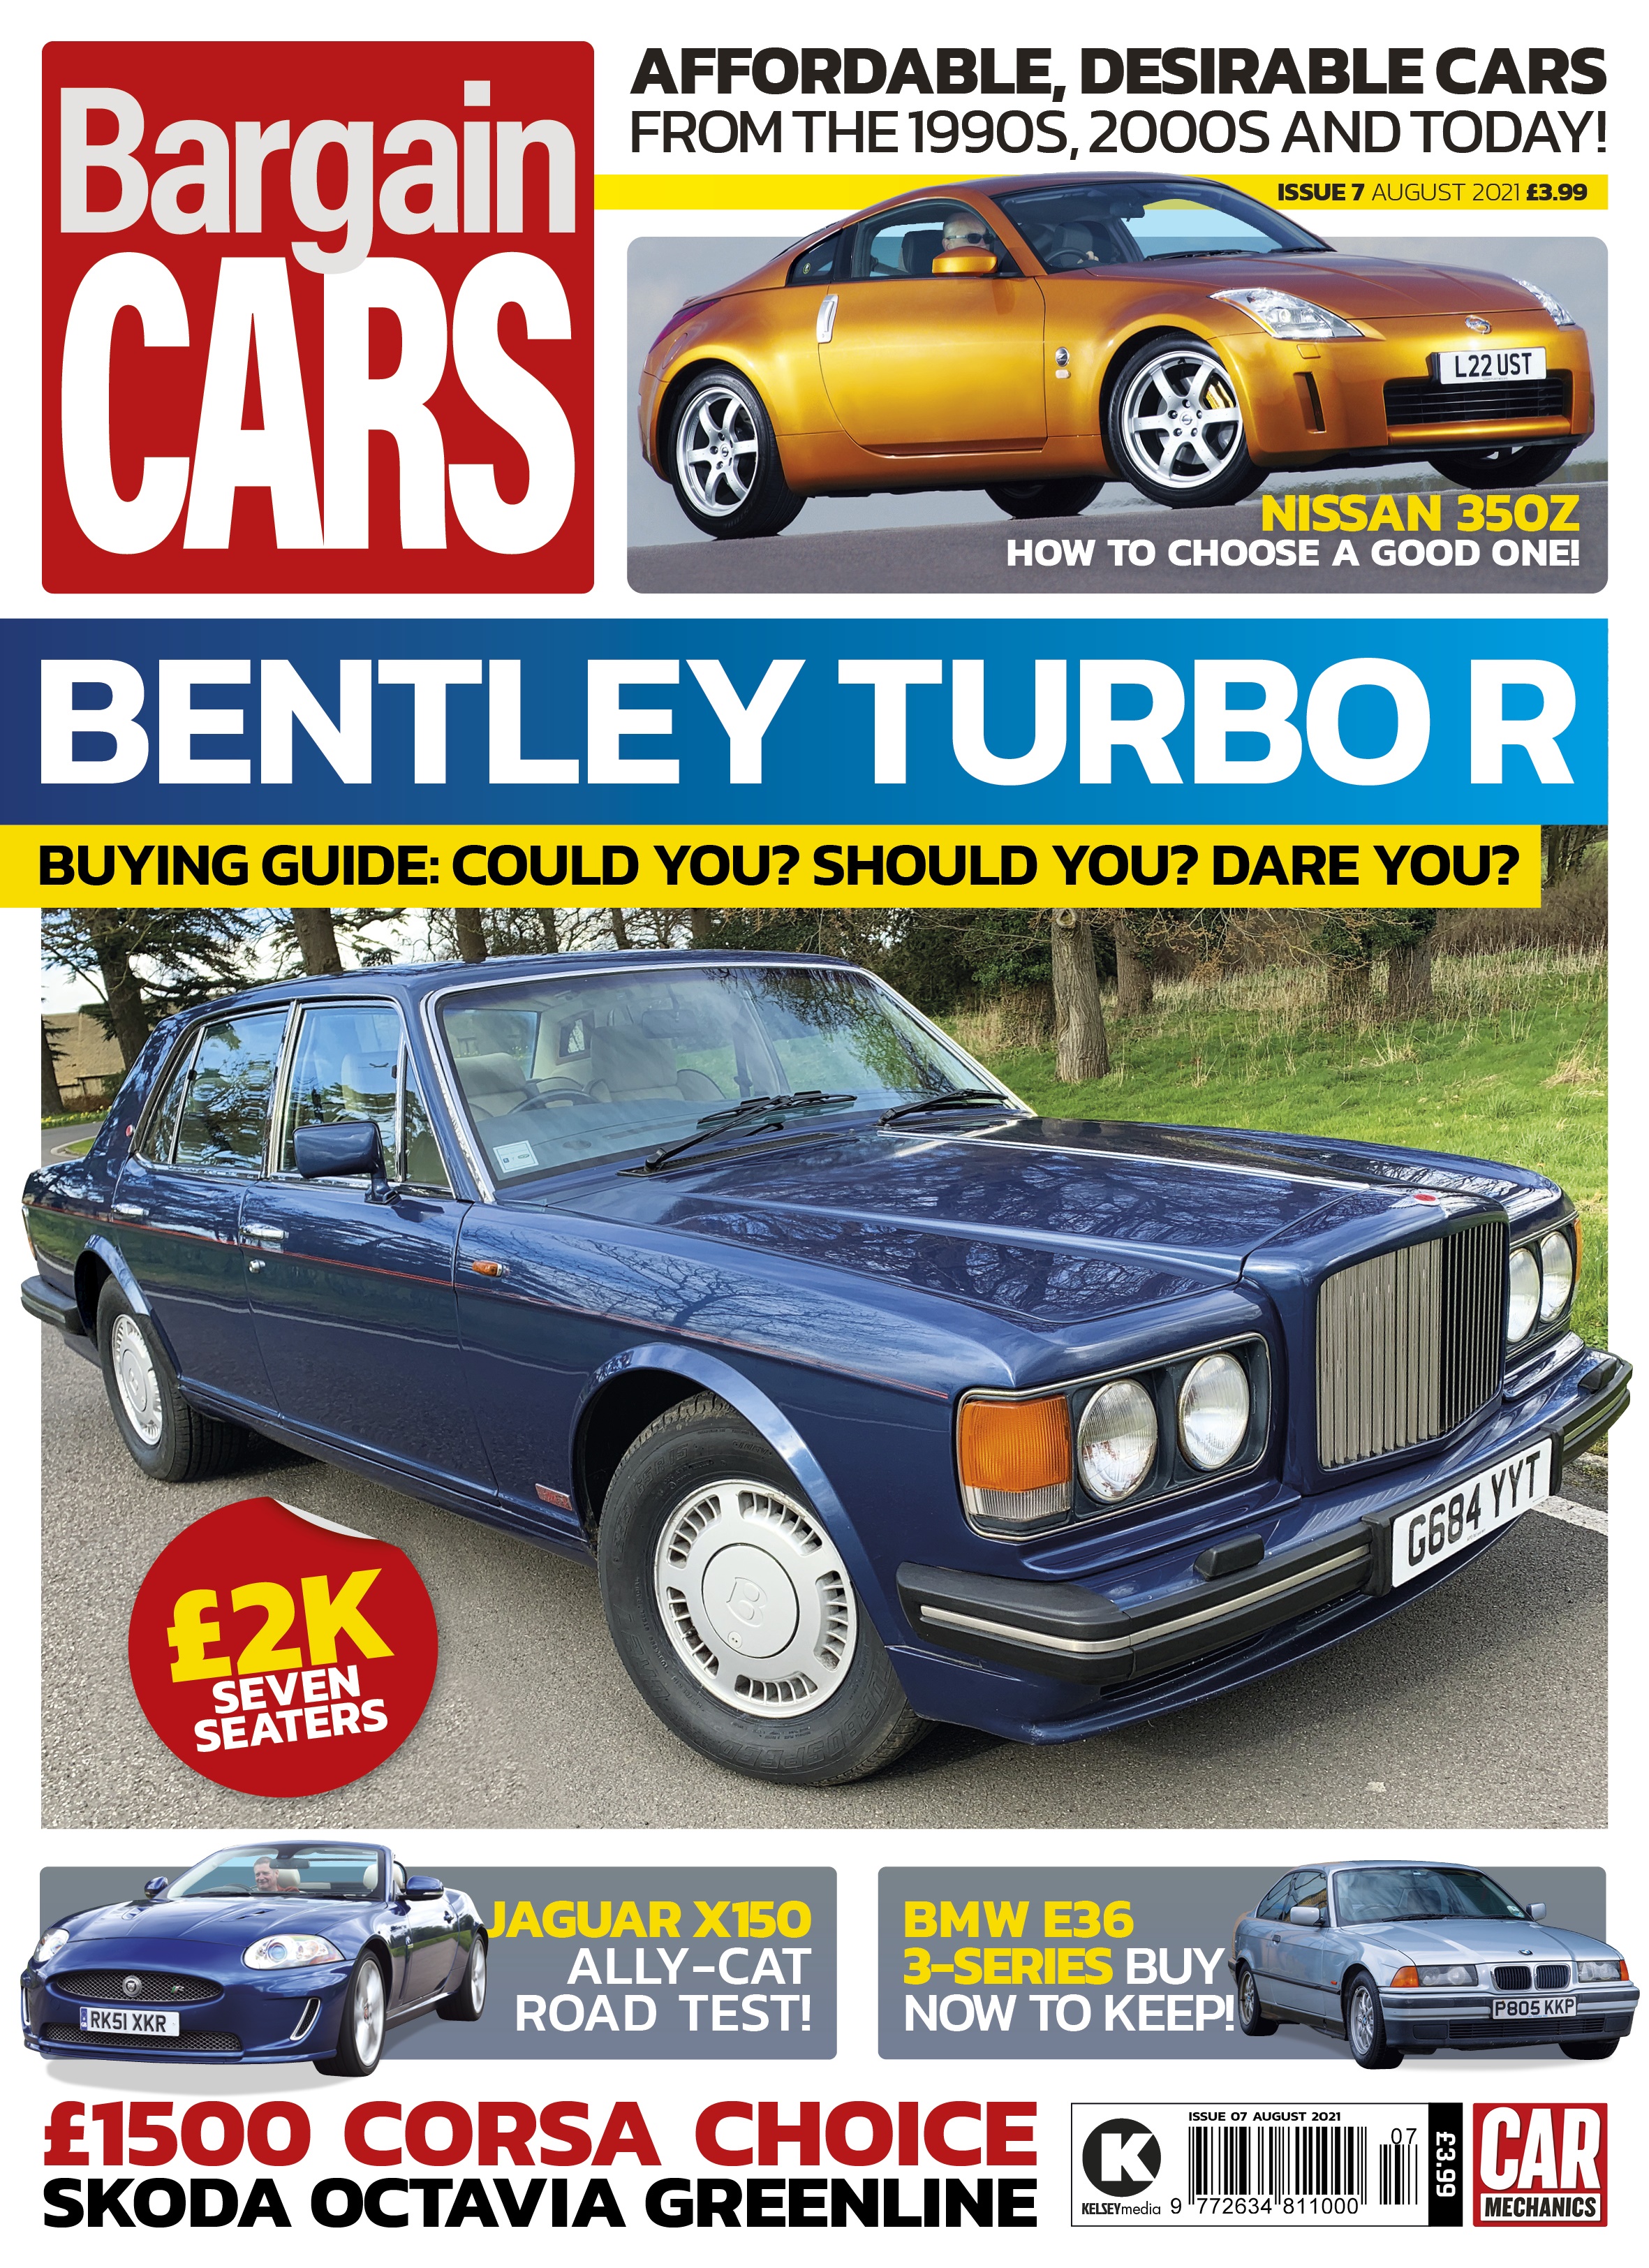 Bargain Cars Issue 7 - Aug 21